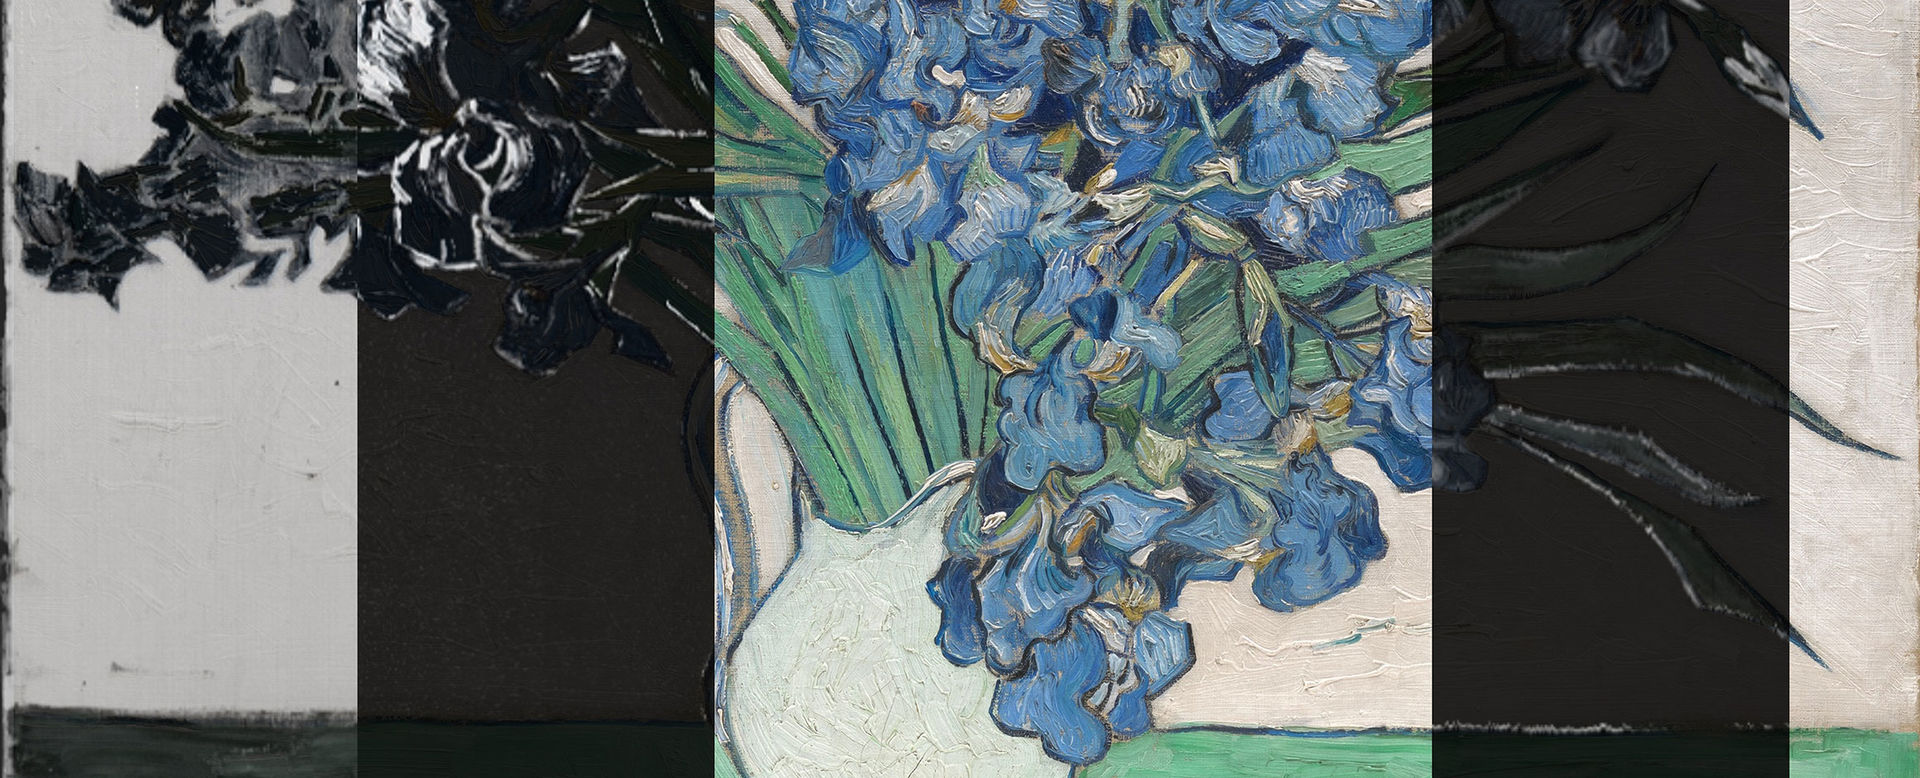 Detail of a paintings of iris flowers in a white ceramic pitcher against a white backdrop. The overall image of the painting is composed of several different bands that image the painting through different scientific methods to reveal various qualities of the painting. The scientific imagery is black-and-white sometimes resembles an x-ray.